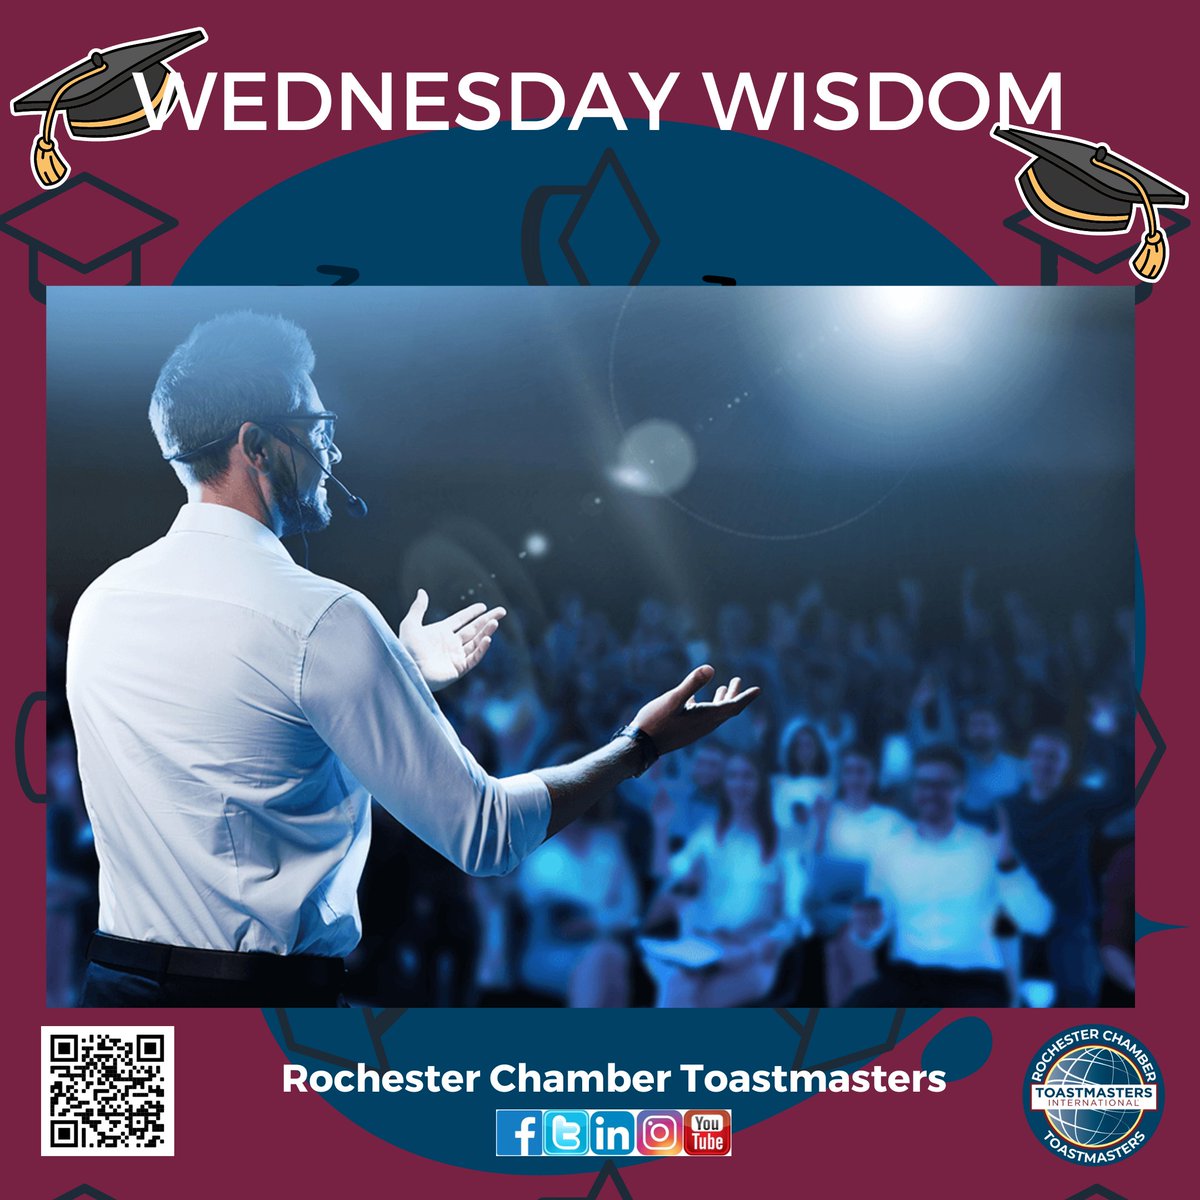 Wisdom Wednesday - The Keys to a Confident Voice: A voice coach’s guide to unleashing your inner power - Click here tinyurl.com/2jcv2nsv #toastmasters #rochmn #publicspeaking #leadership #neighborshare #neighborstory #neighbors #wisdomwednesday #voice #power #confident